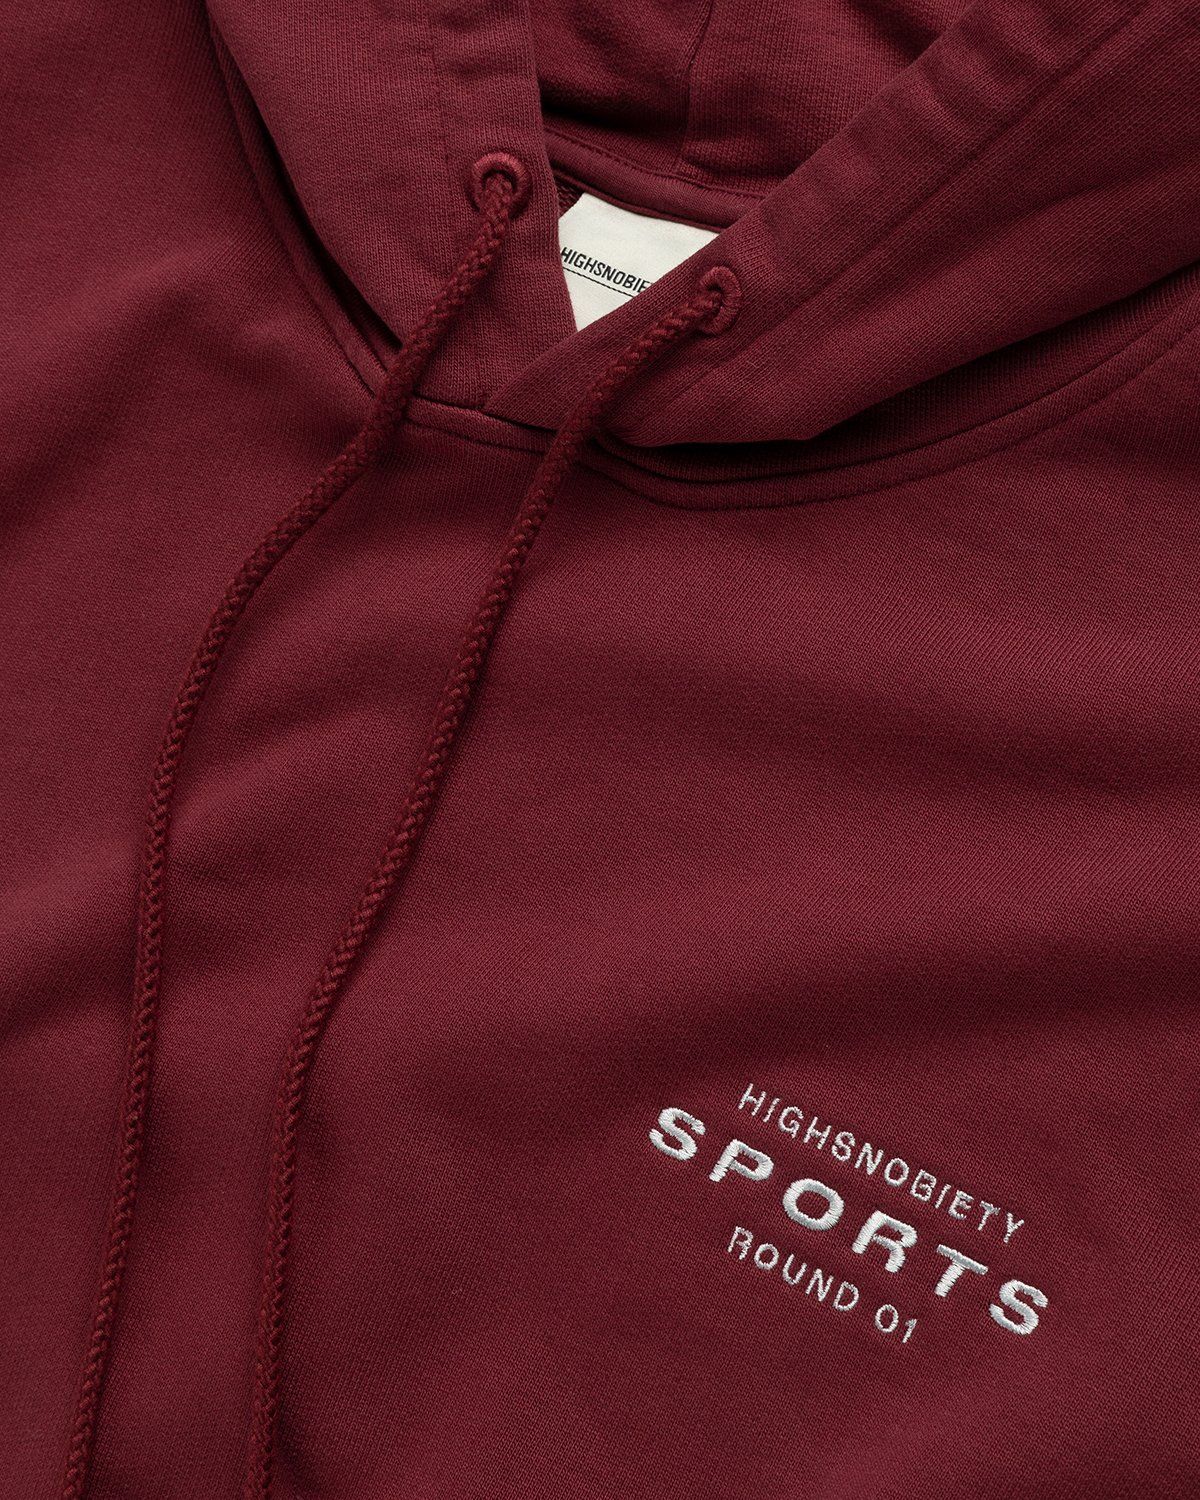 Highsnobiety – HS Sports Focus Hoodie Bordeaux - Sweats - Red - Image 3